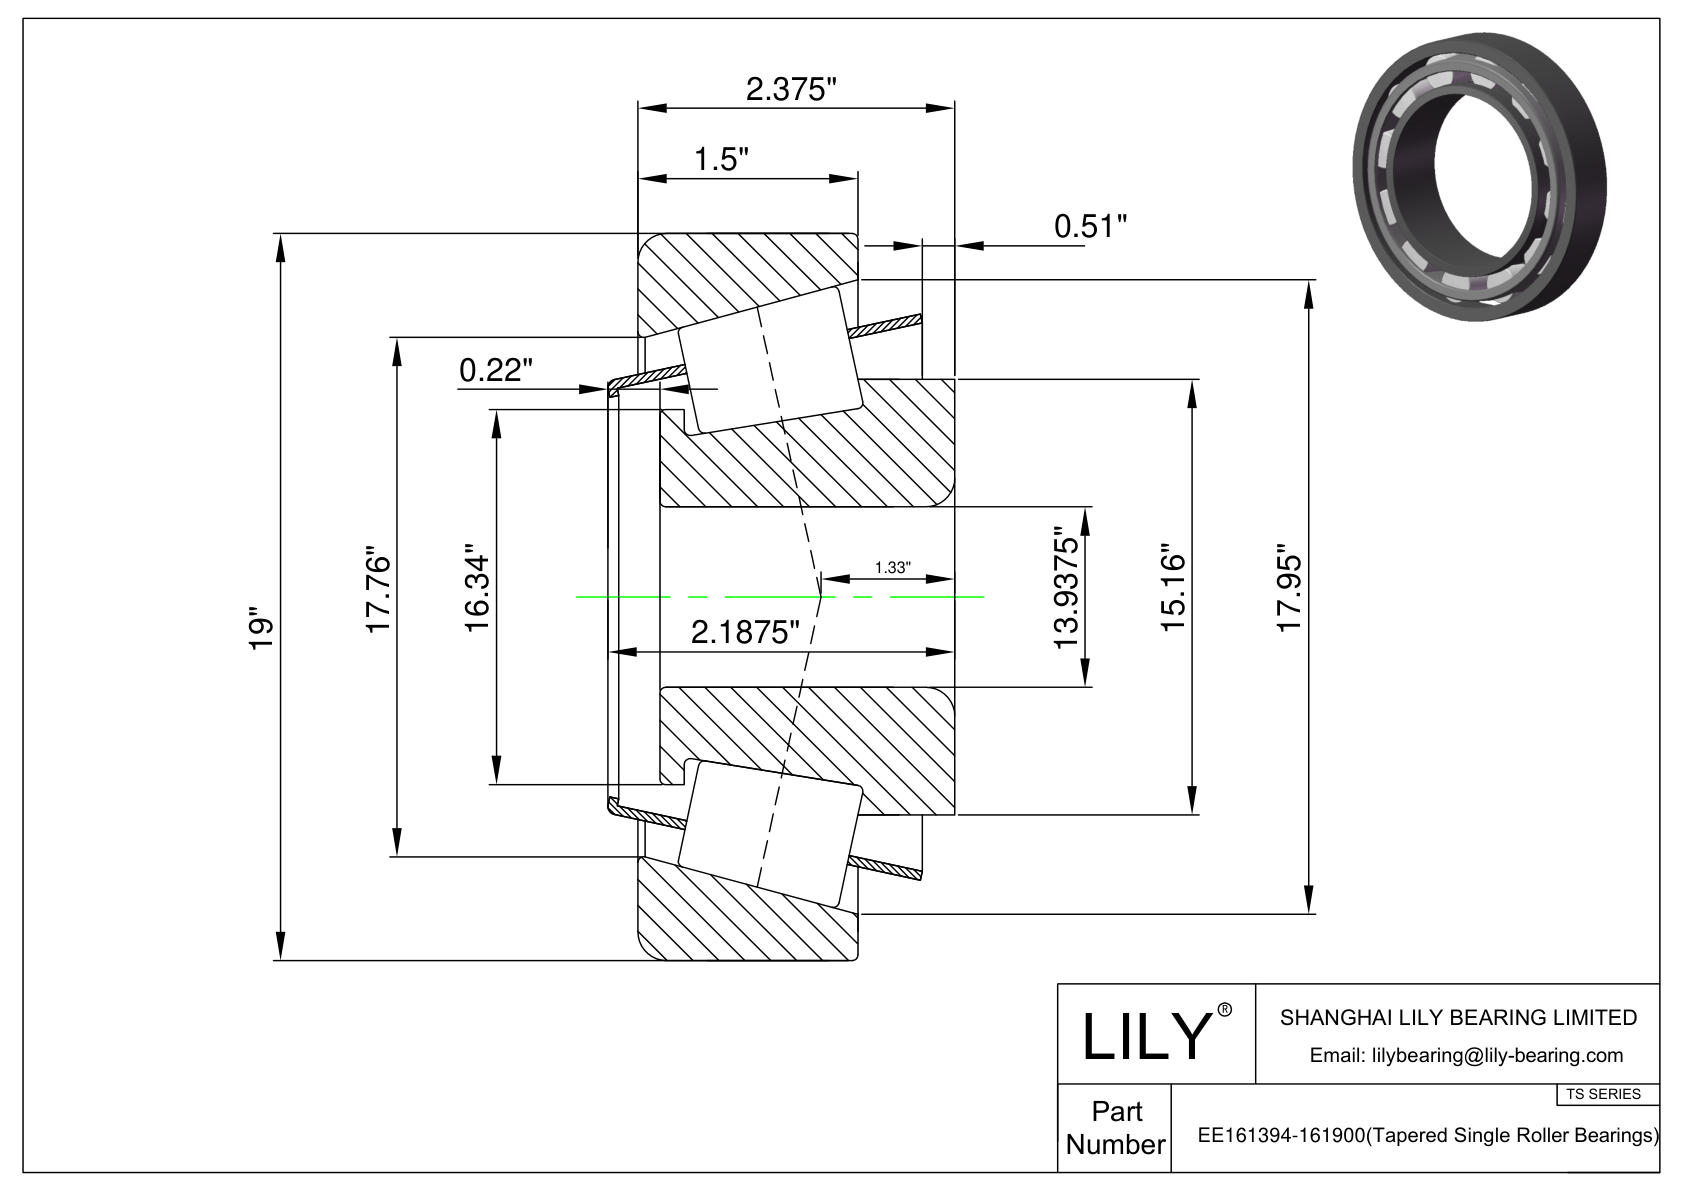 EE161394-161900 TS (Tapered Single Roller Bearings) (Imperial) cad drawing